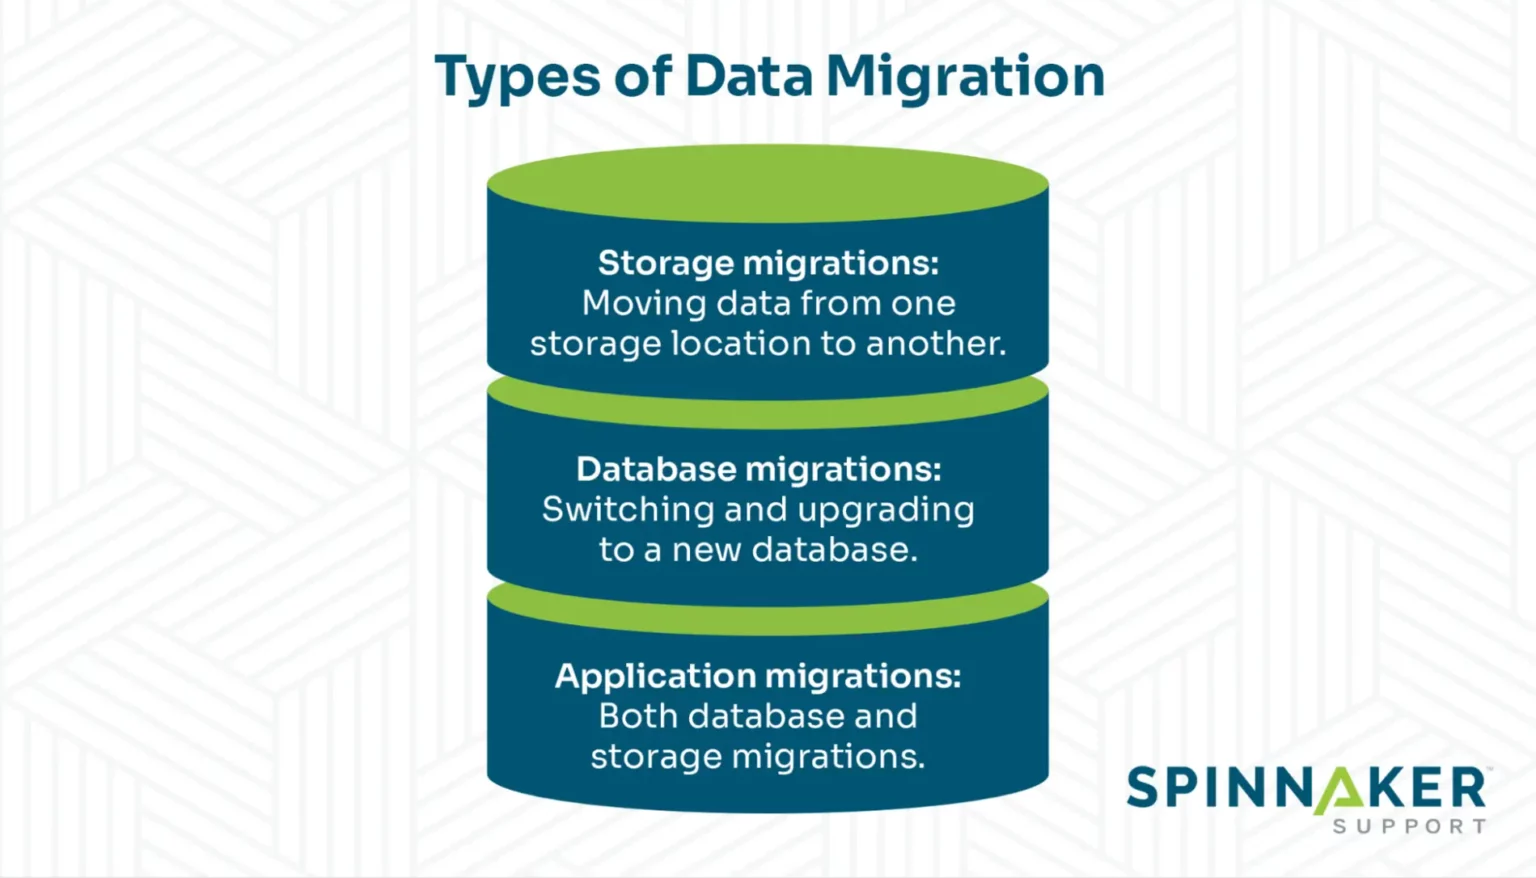 The different types of data migration